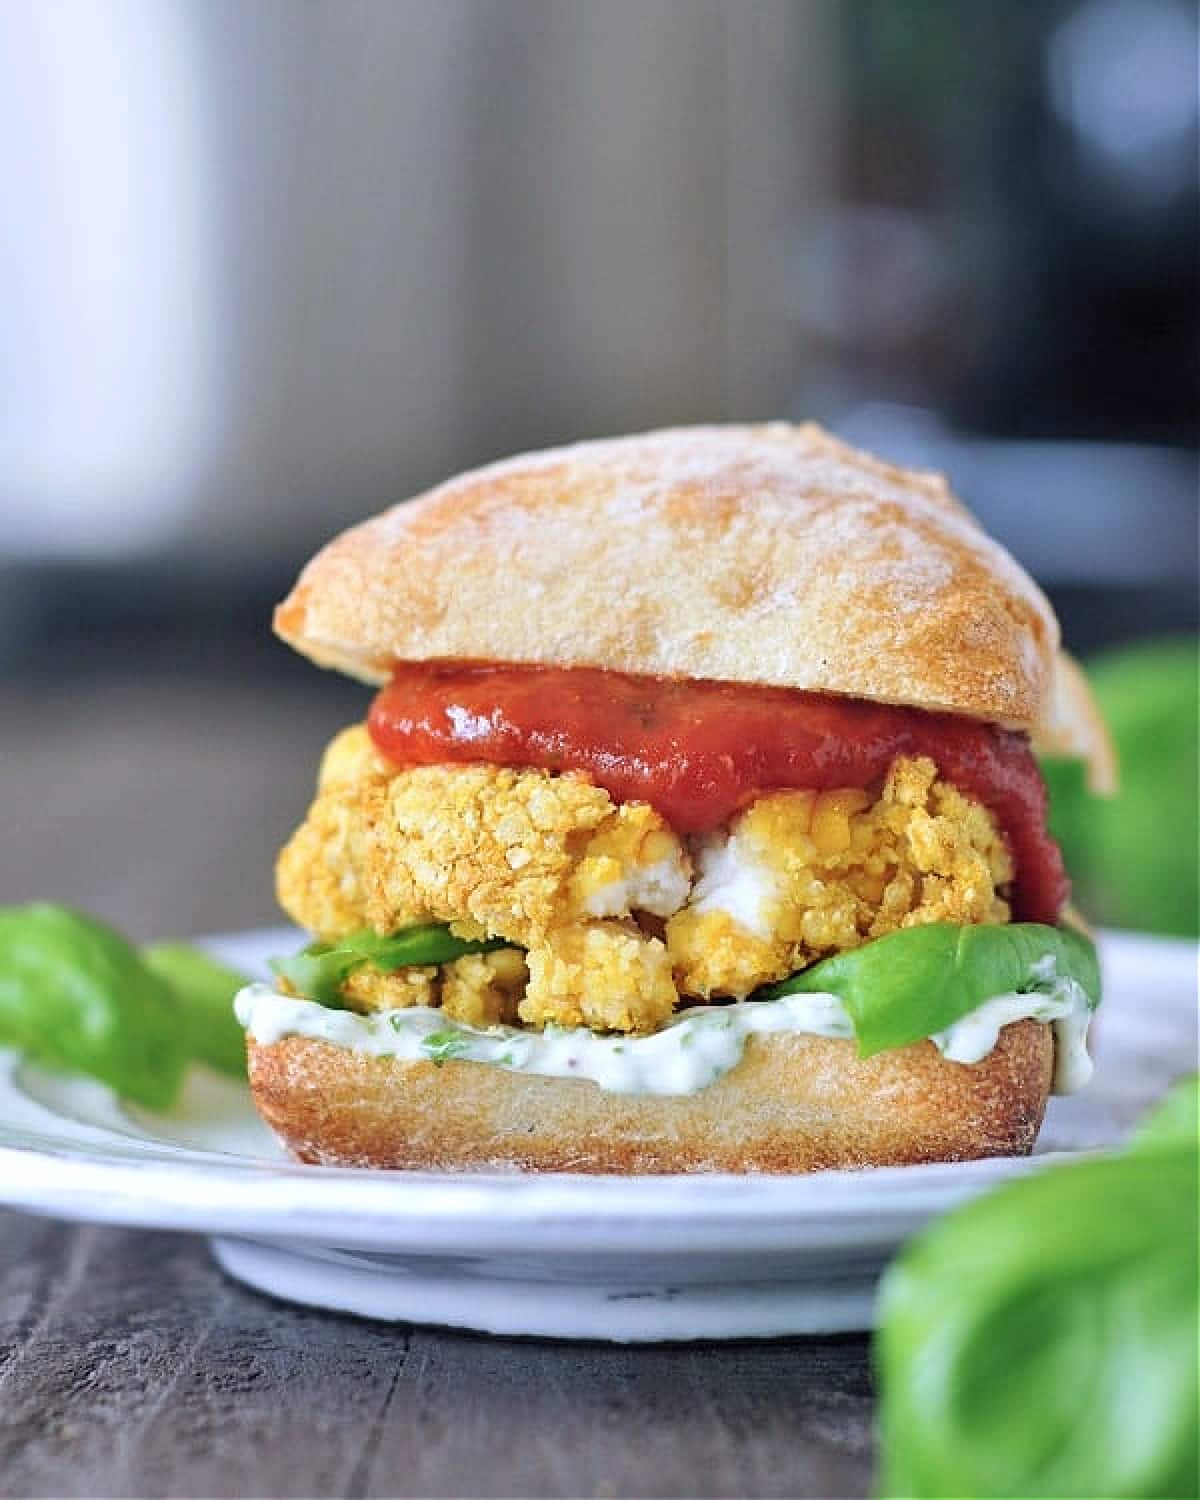 A vegan mozzarella stuffed chicken burger in a bun with basil aioli and marinara sauce sits on a white plate. A basil plant is blurred in the foreground.